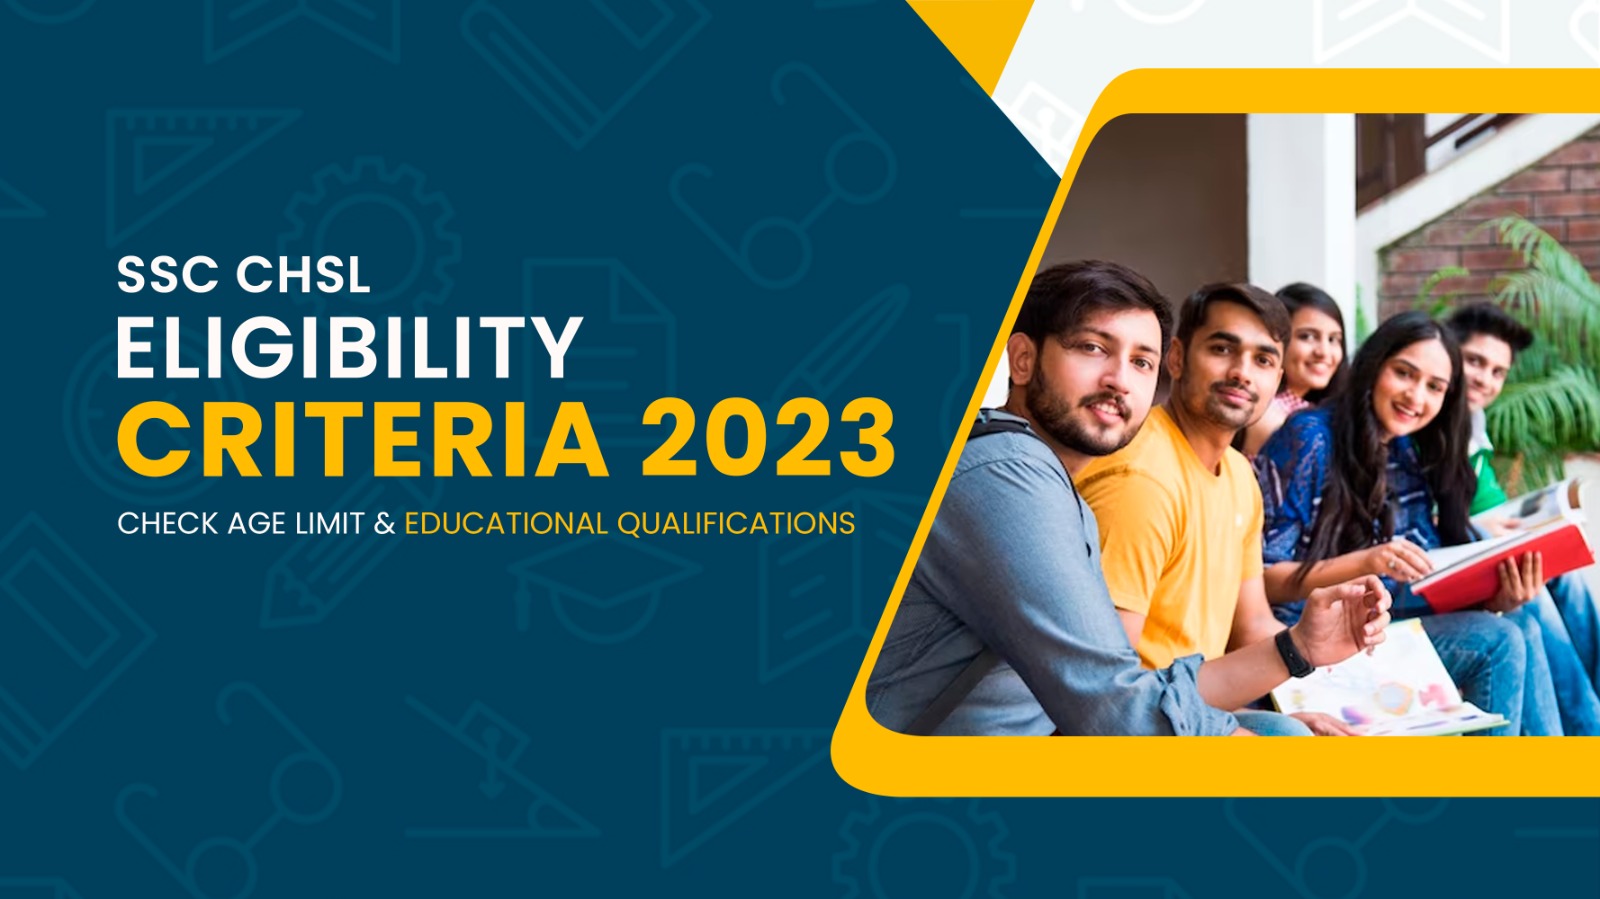 SSC CHSL Eligibility Criteria 2023, Check Age Limit & Educational Qualifications